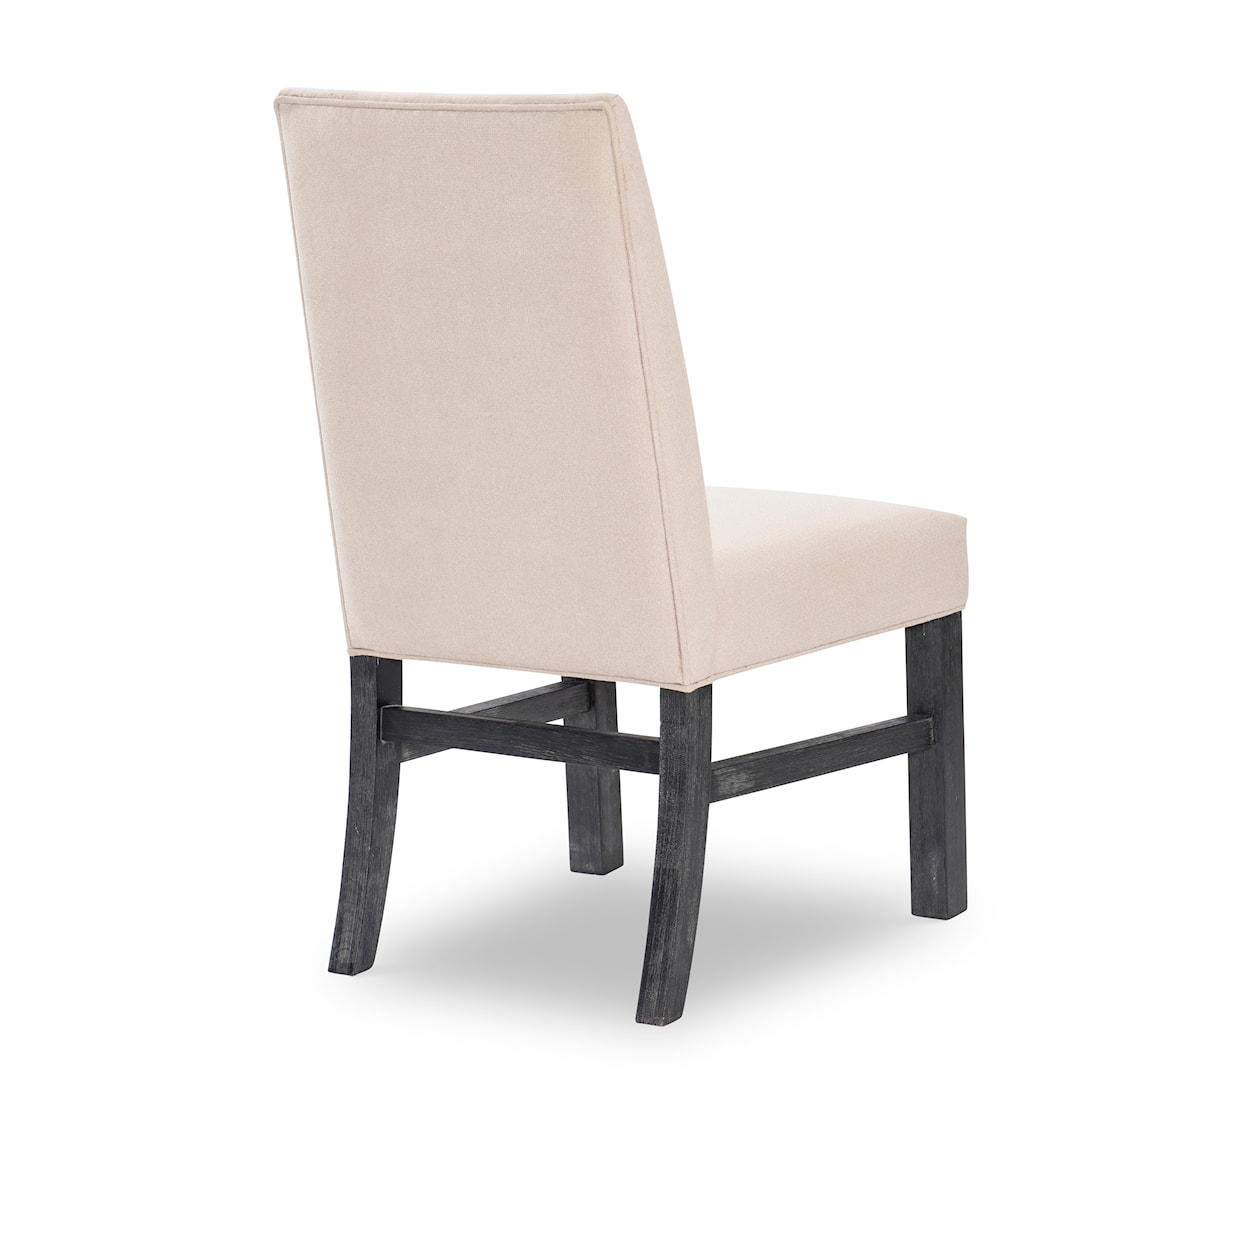 Legacy Classic Westwood Upholstered Dining Chairs